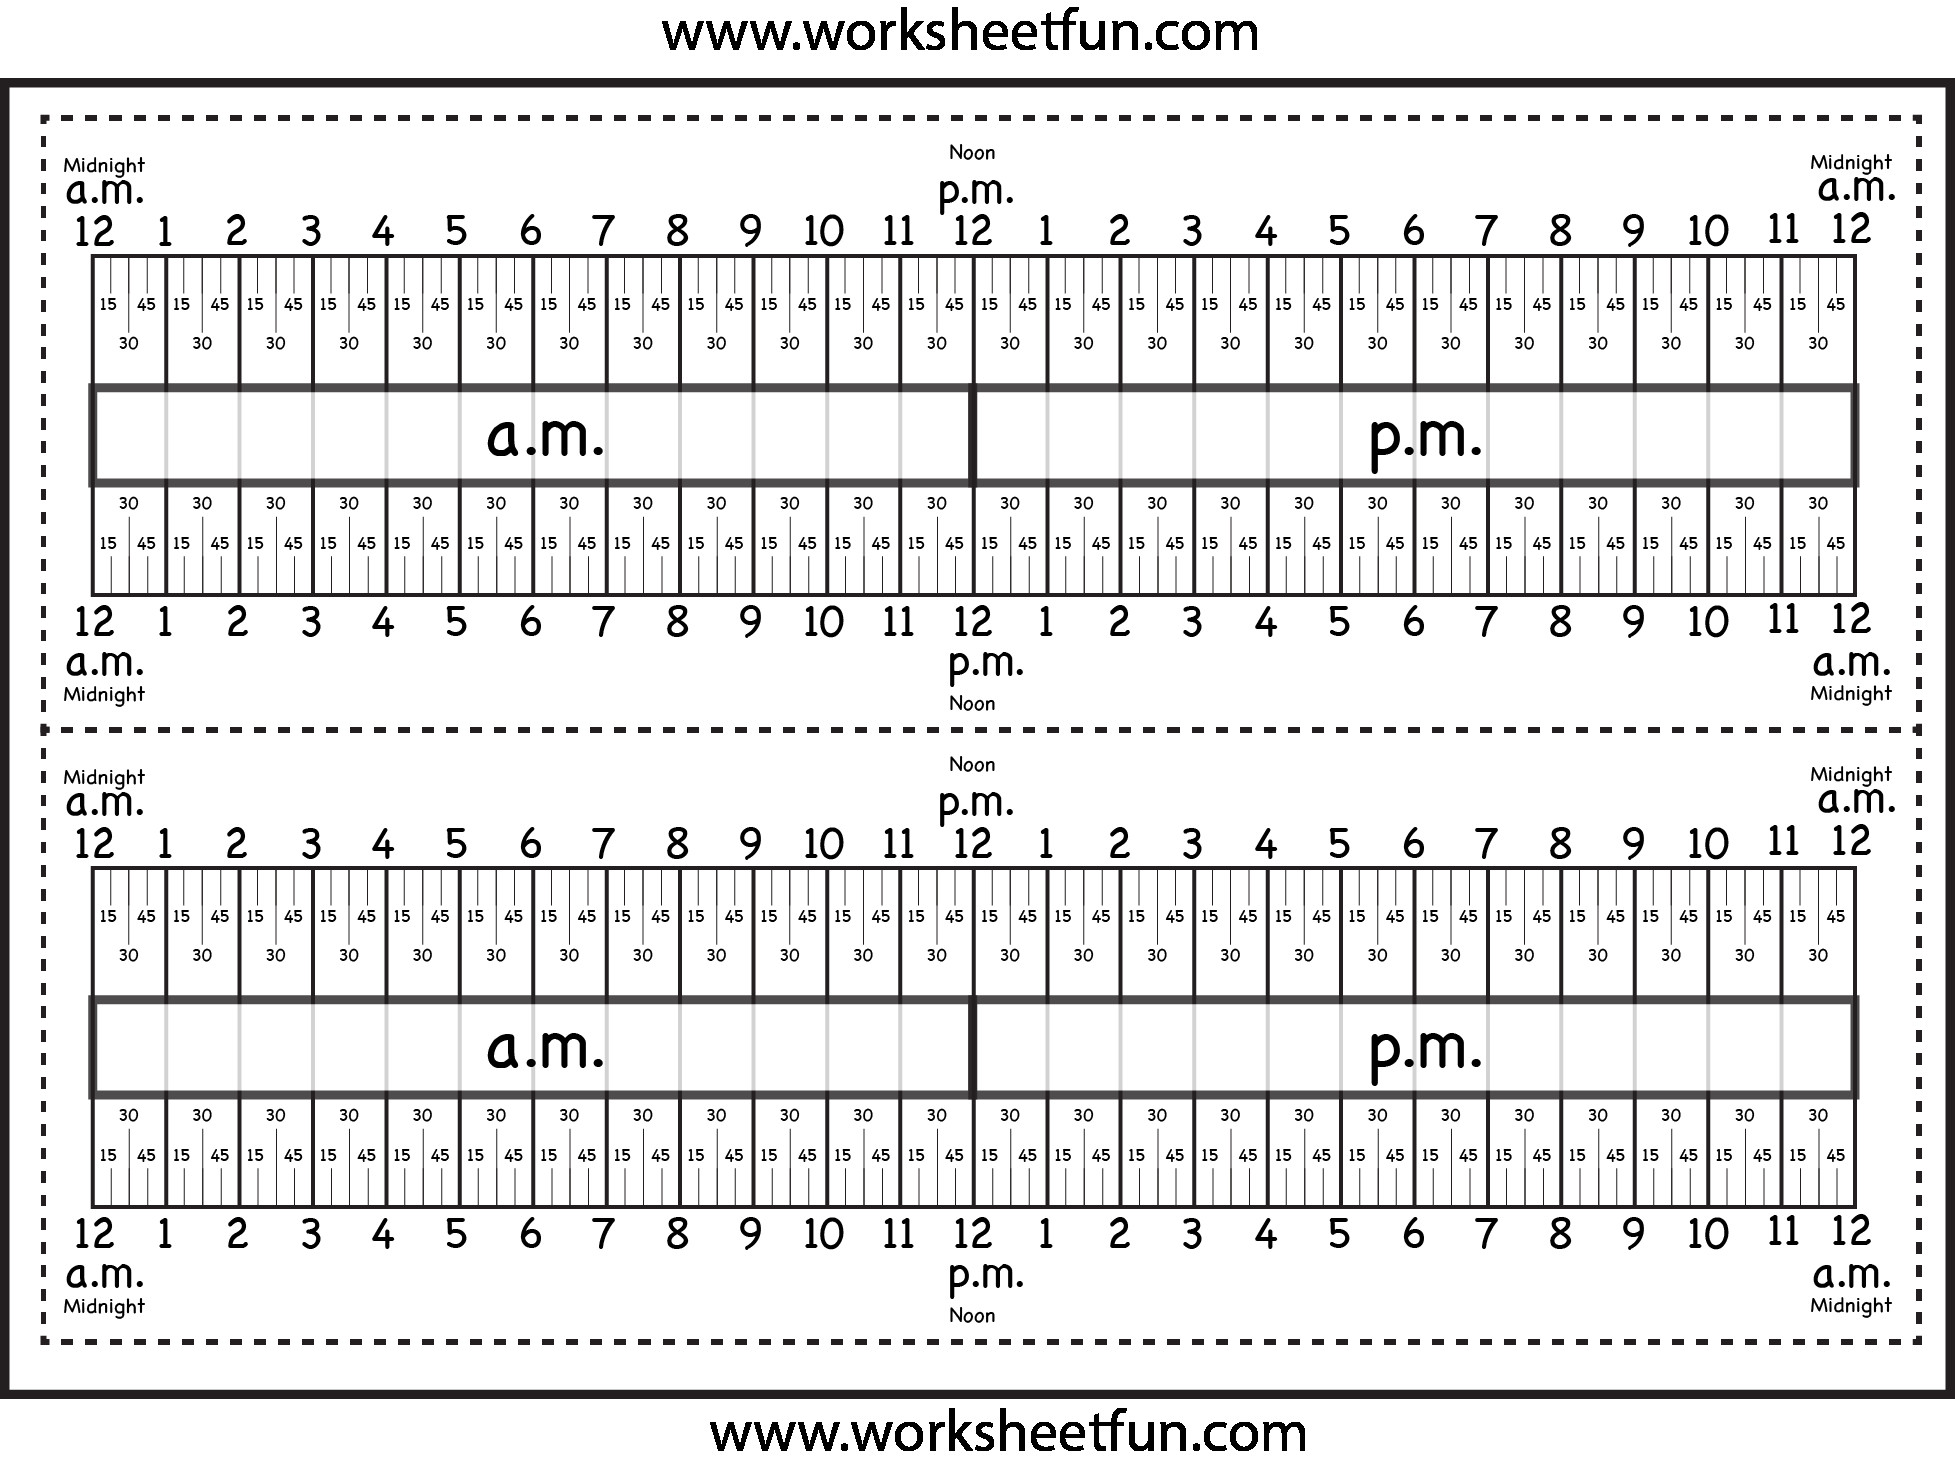 Free Math Worksheets Second Grade 2 Telling Time Telling Time 5 Minute Intervals